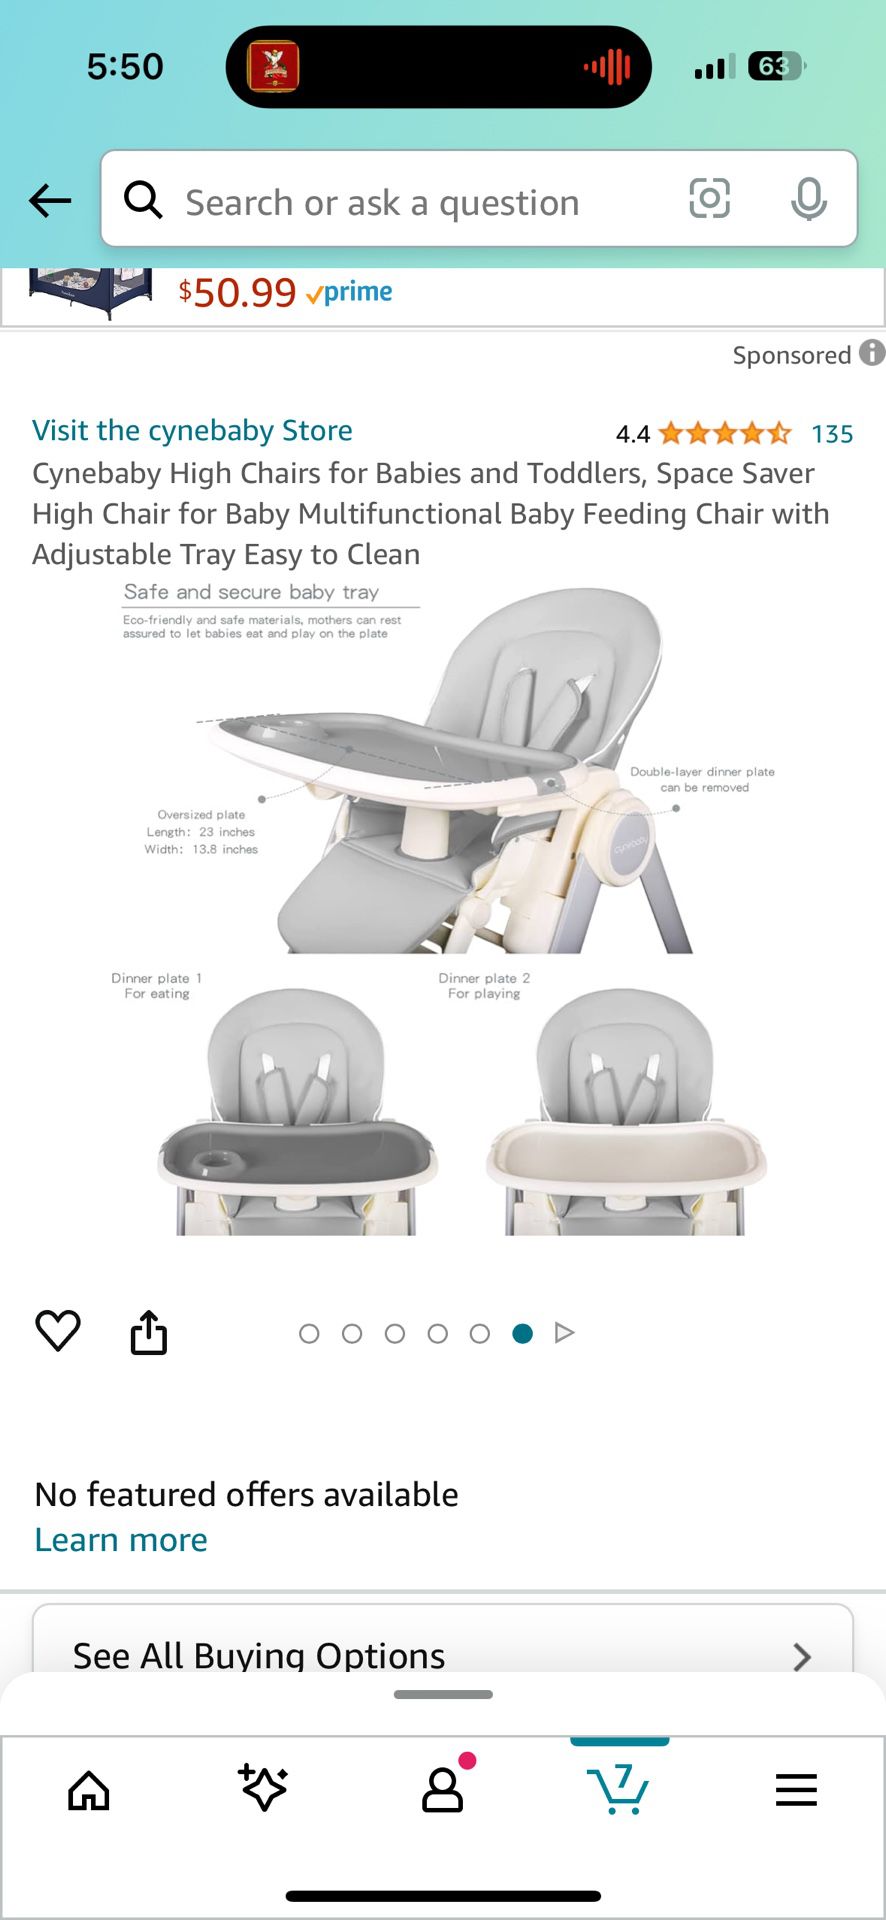 Cynebaby High Chairs for Babies and
Toddlers, Space Saver High Chair for Baby
Multifunctional Baby Feeding Chair with
Adjustable Tray Easy to Clean